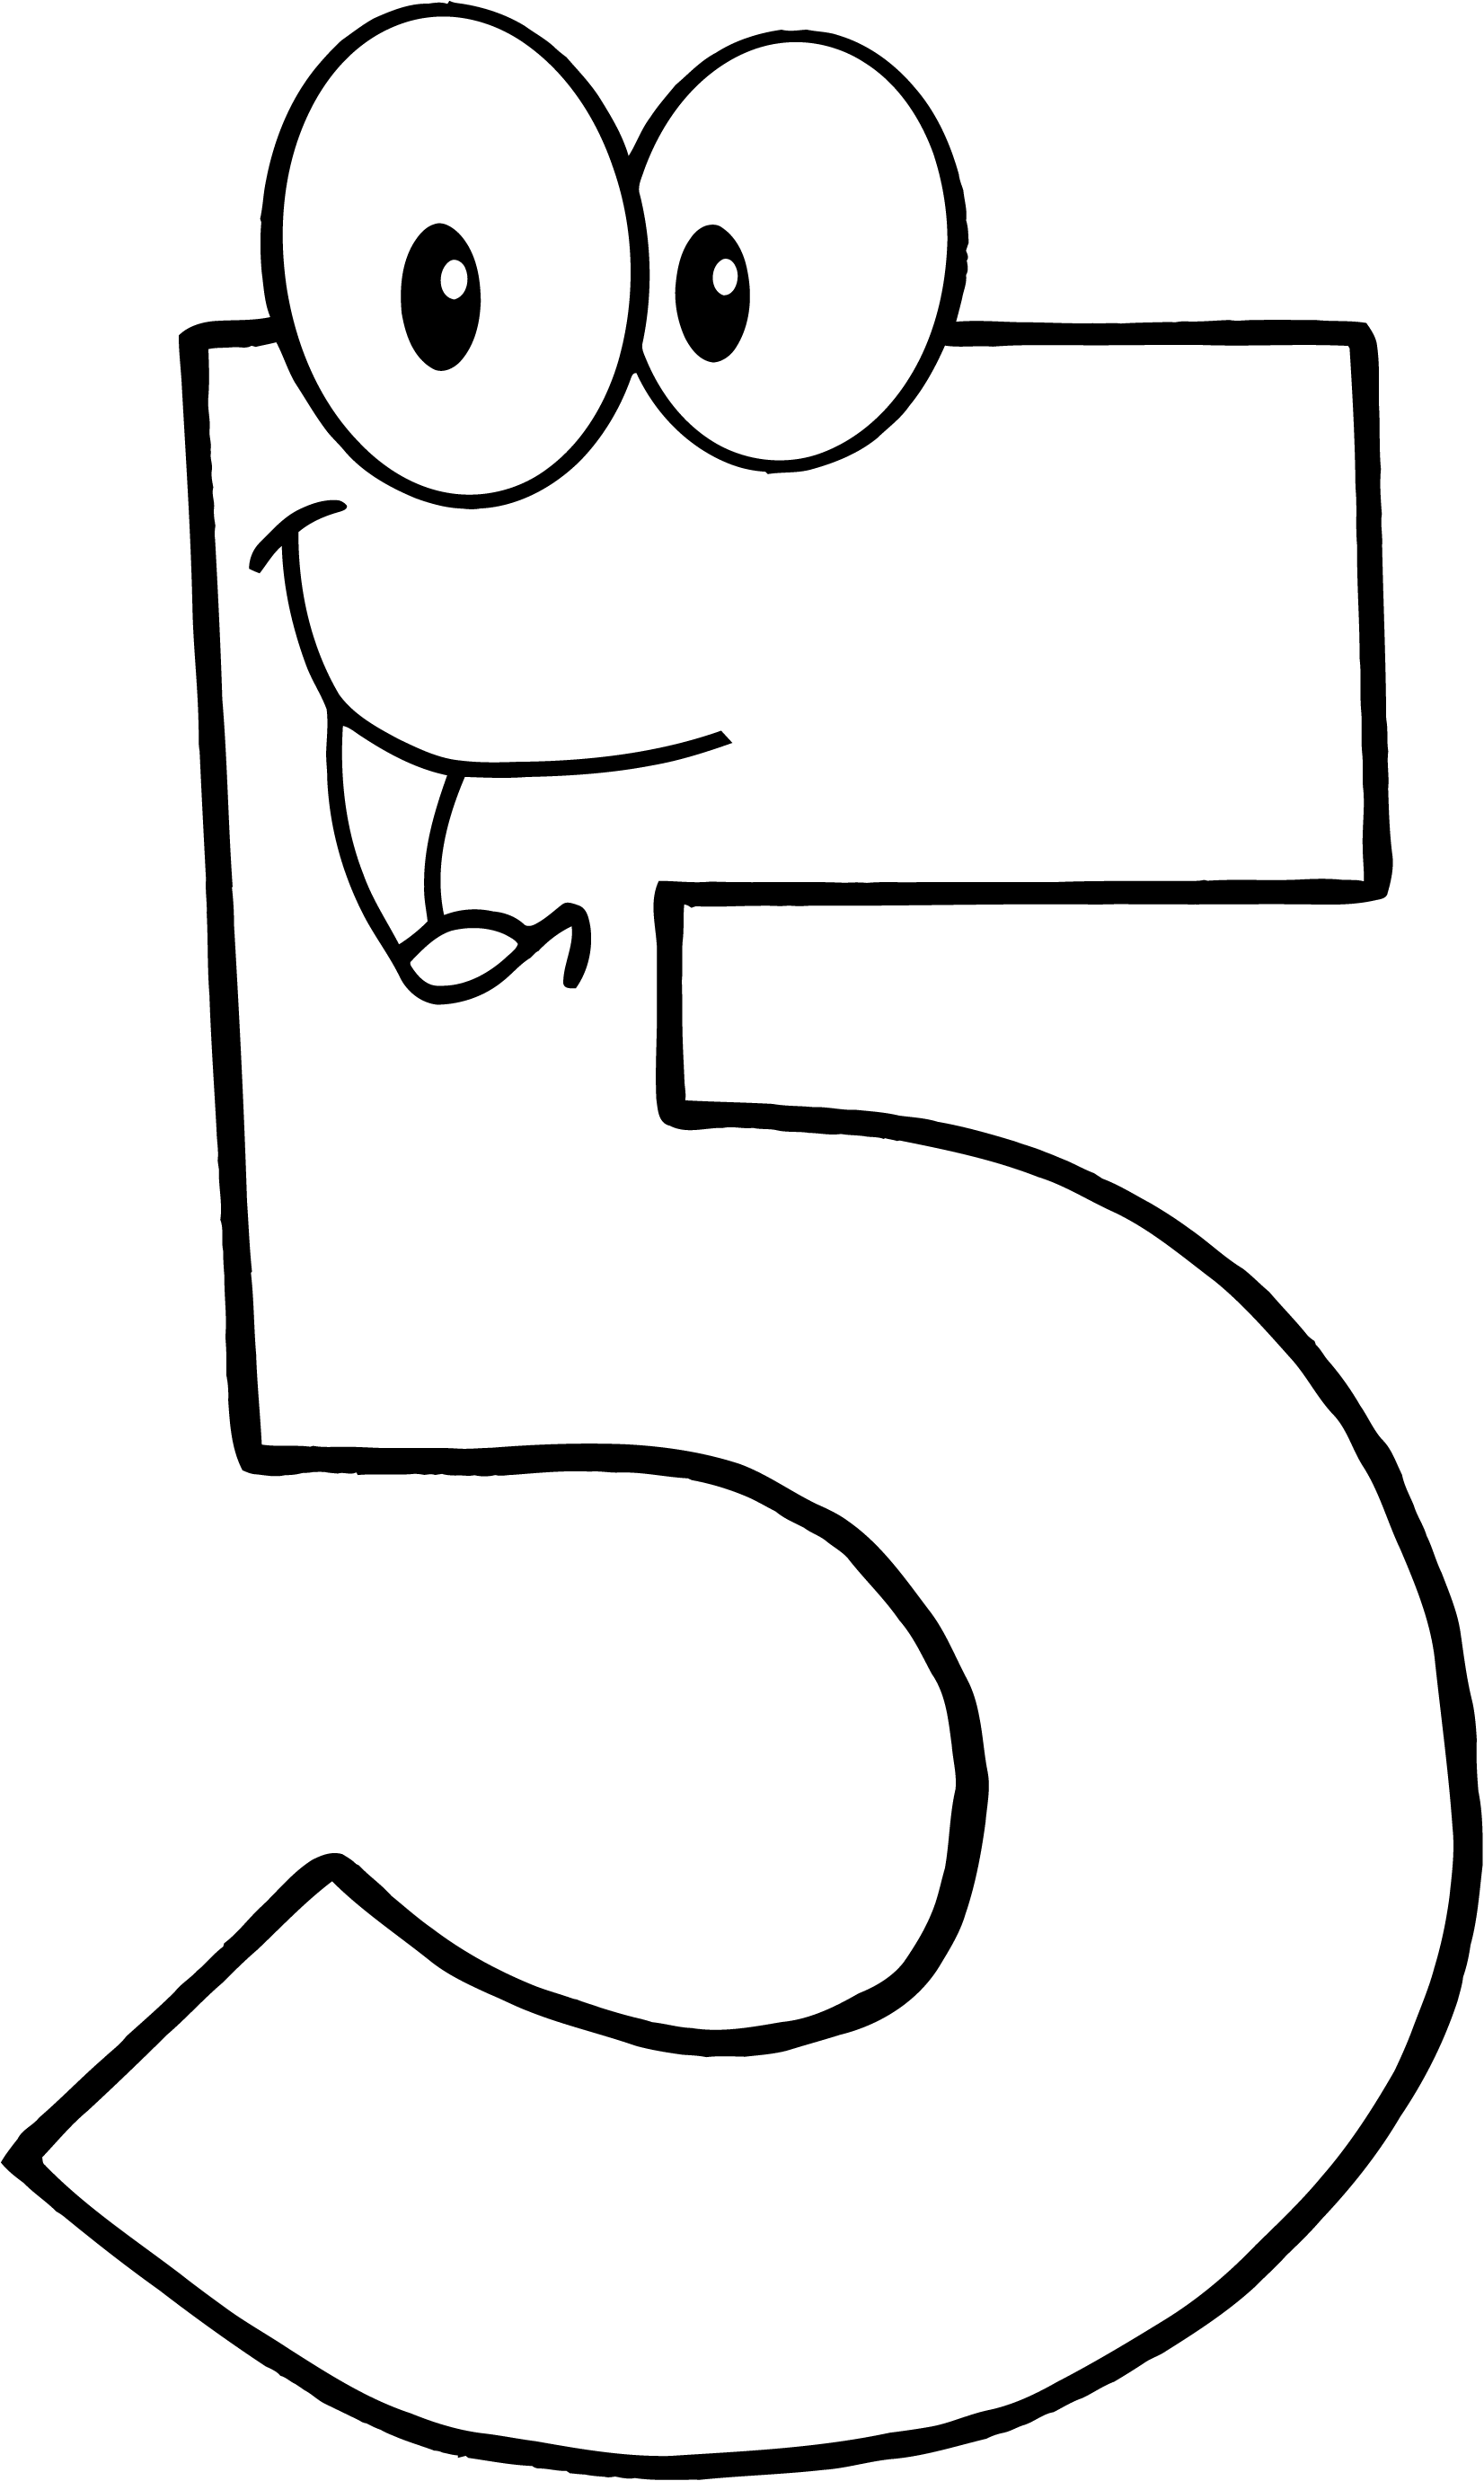 Number five clipart